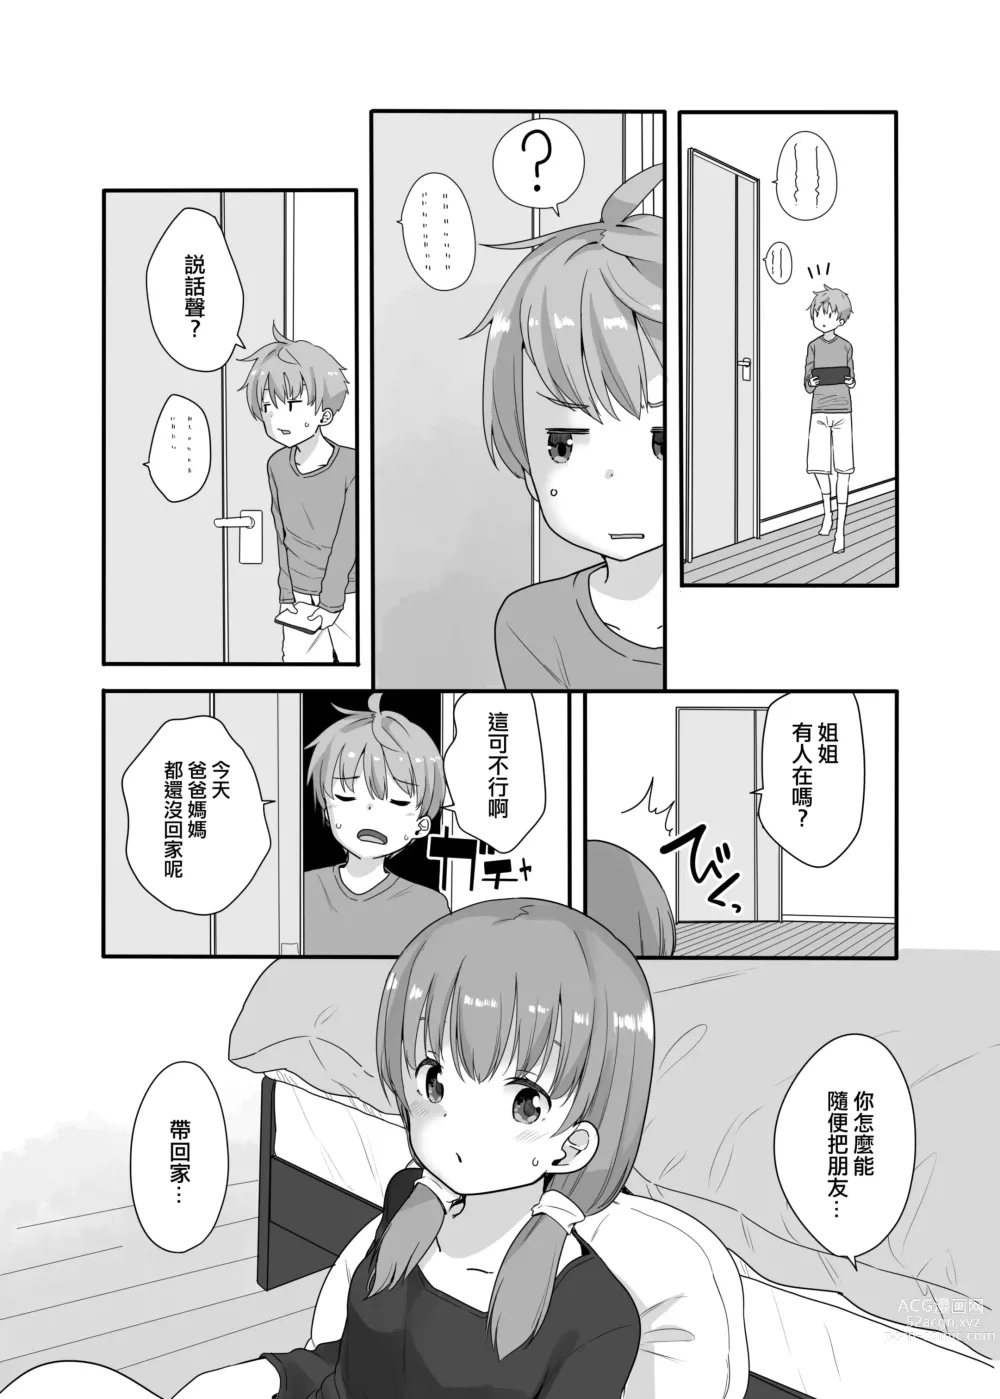 Page 4 of doujinshi Little Sister With Grande Everyday 3